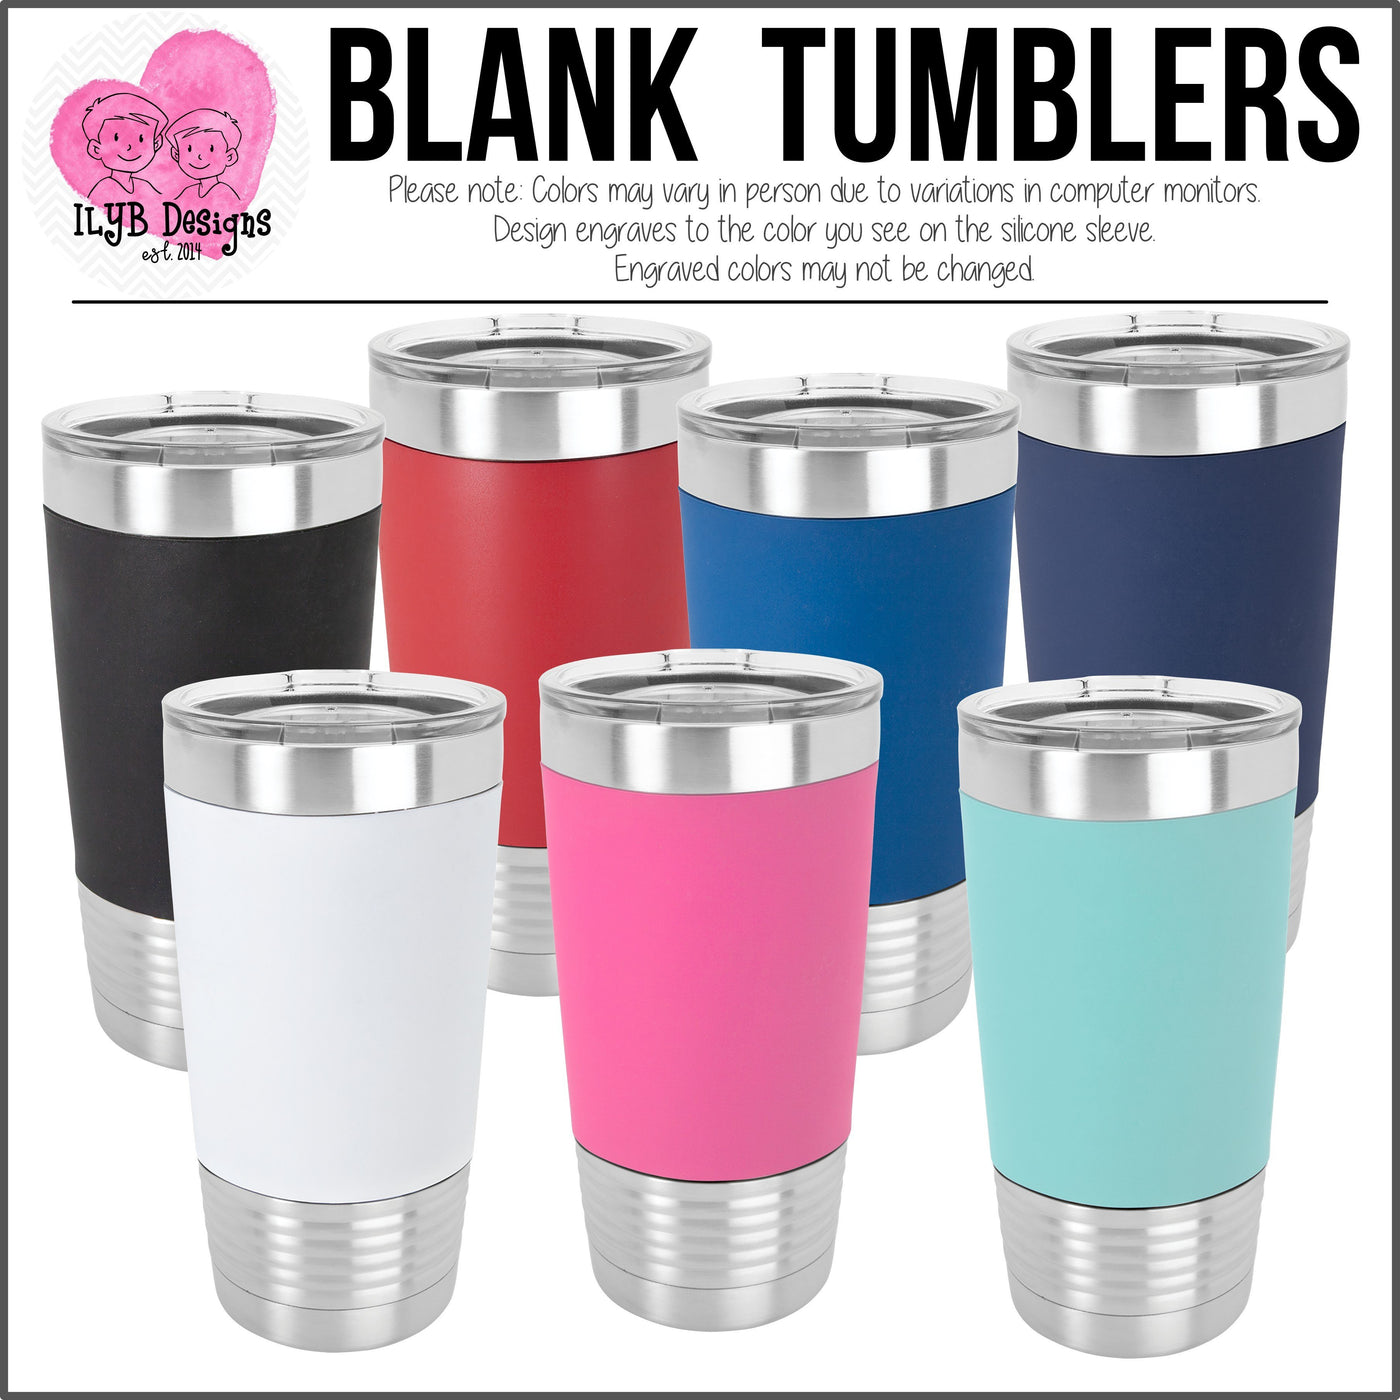 Blank Tumblers | 20oz Polar Camel Stainless Steel Tumbler with colored silicone sleeve. Colors are black, red, royal blue, navy blue, white, pink, and teal.